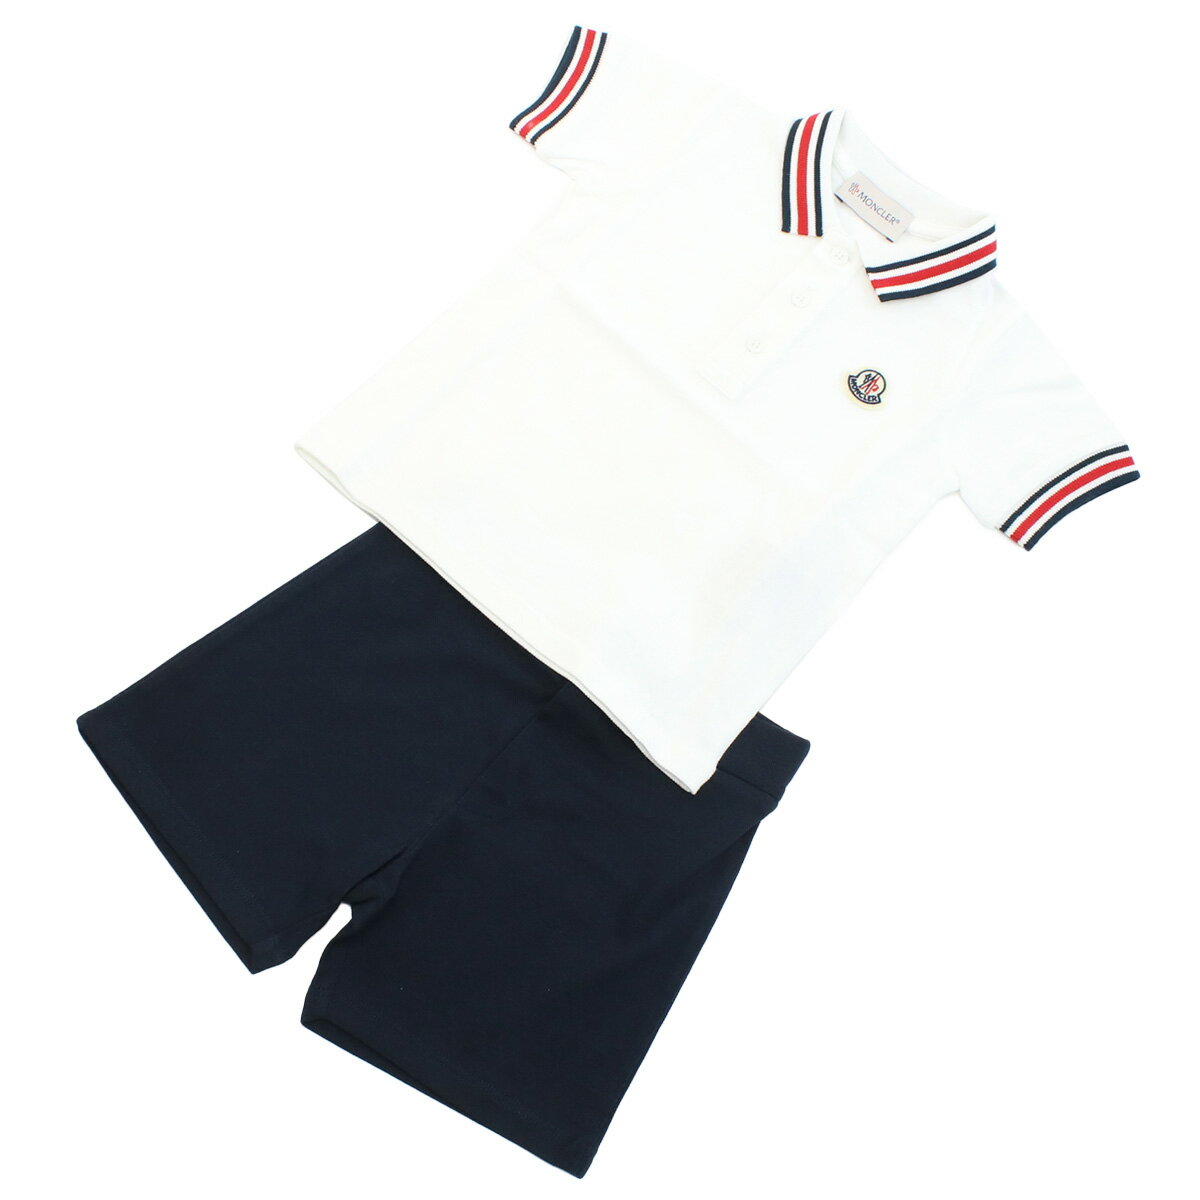 N[ MONCLER xr[|ZbgAbv oYj Mtg8M00028 COMPLETO POLO M 8496F 002zCgn lCr[n kb-01 tcld-bhsn